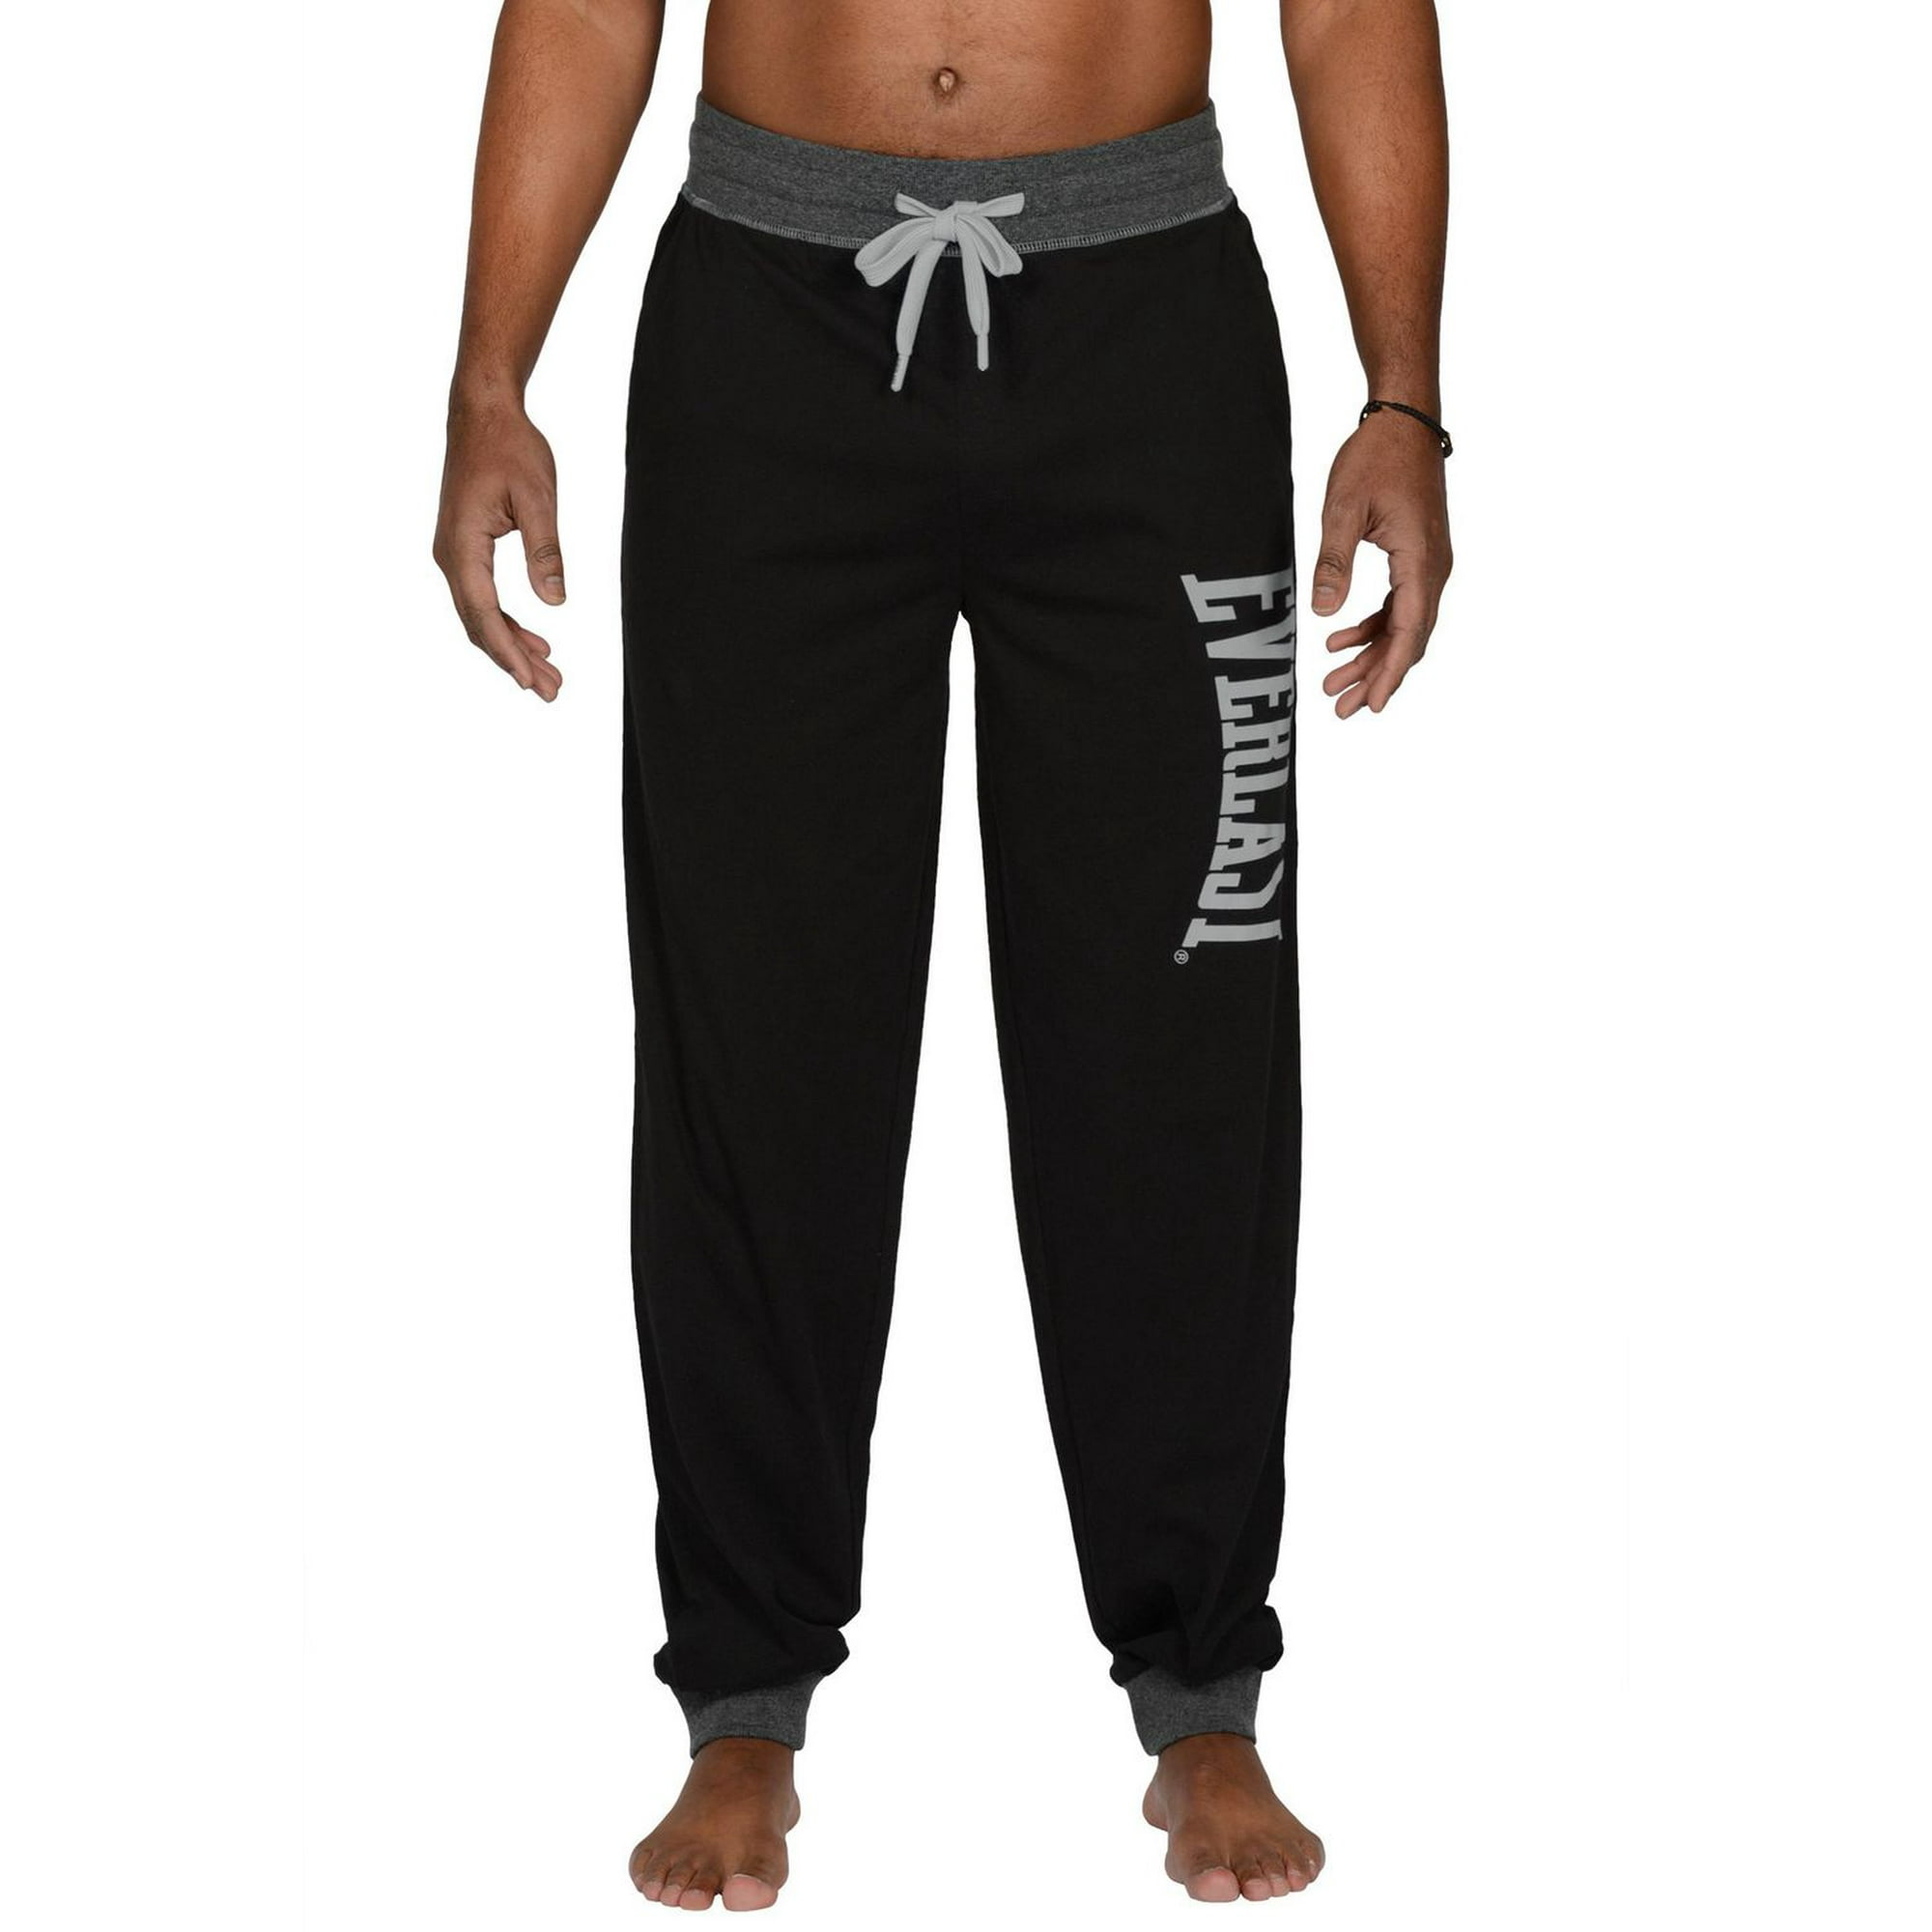 Everlast Lounge and Casual Men's Joggers Pants 